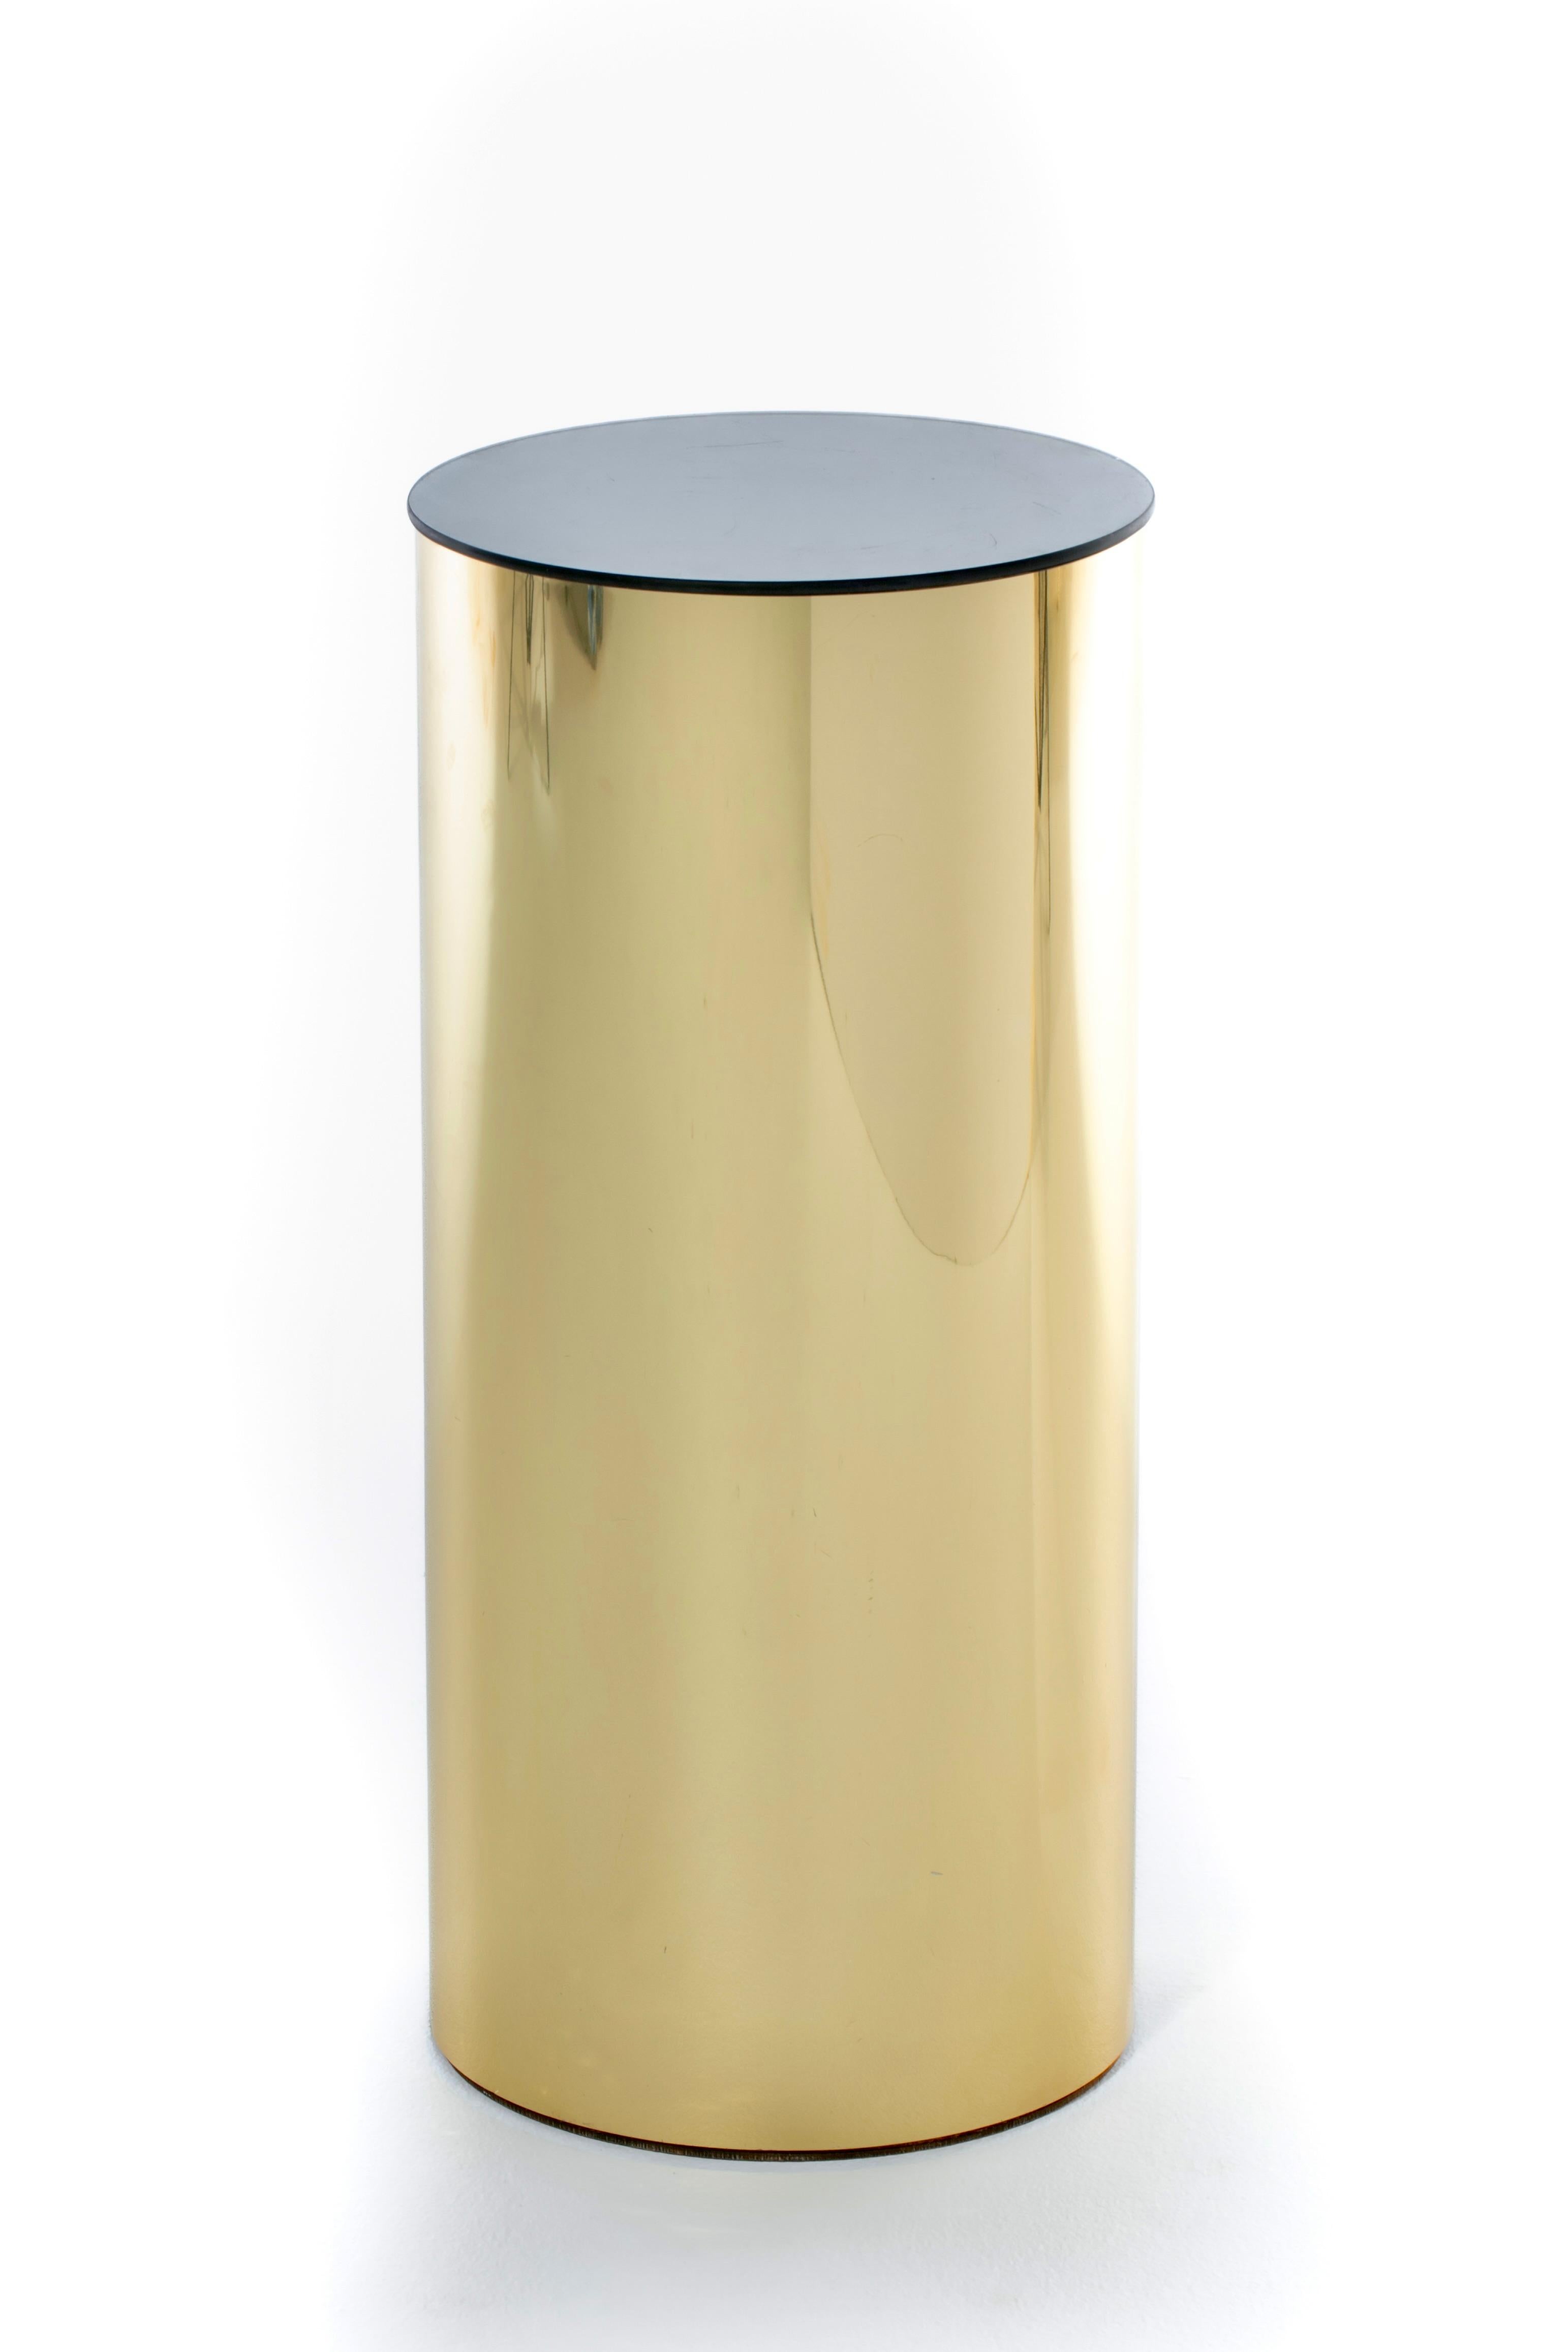 American Post Modern Curtis Jere Circular Pedestal of Brass and Smoked Glass, c. 1984 For Sale